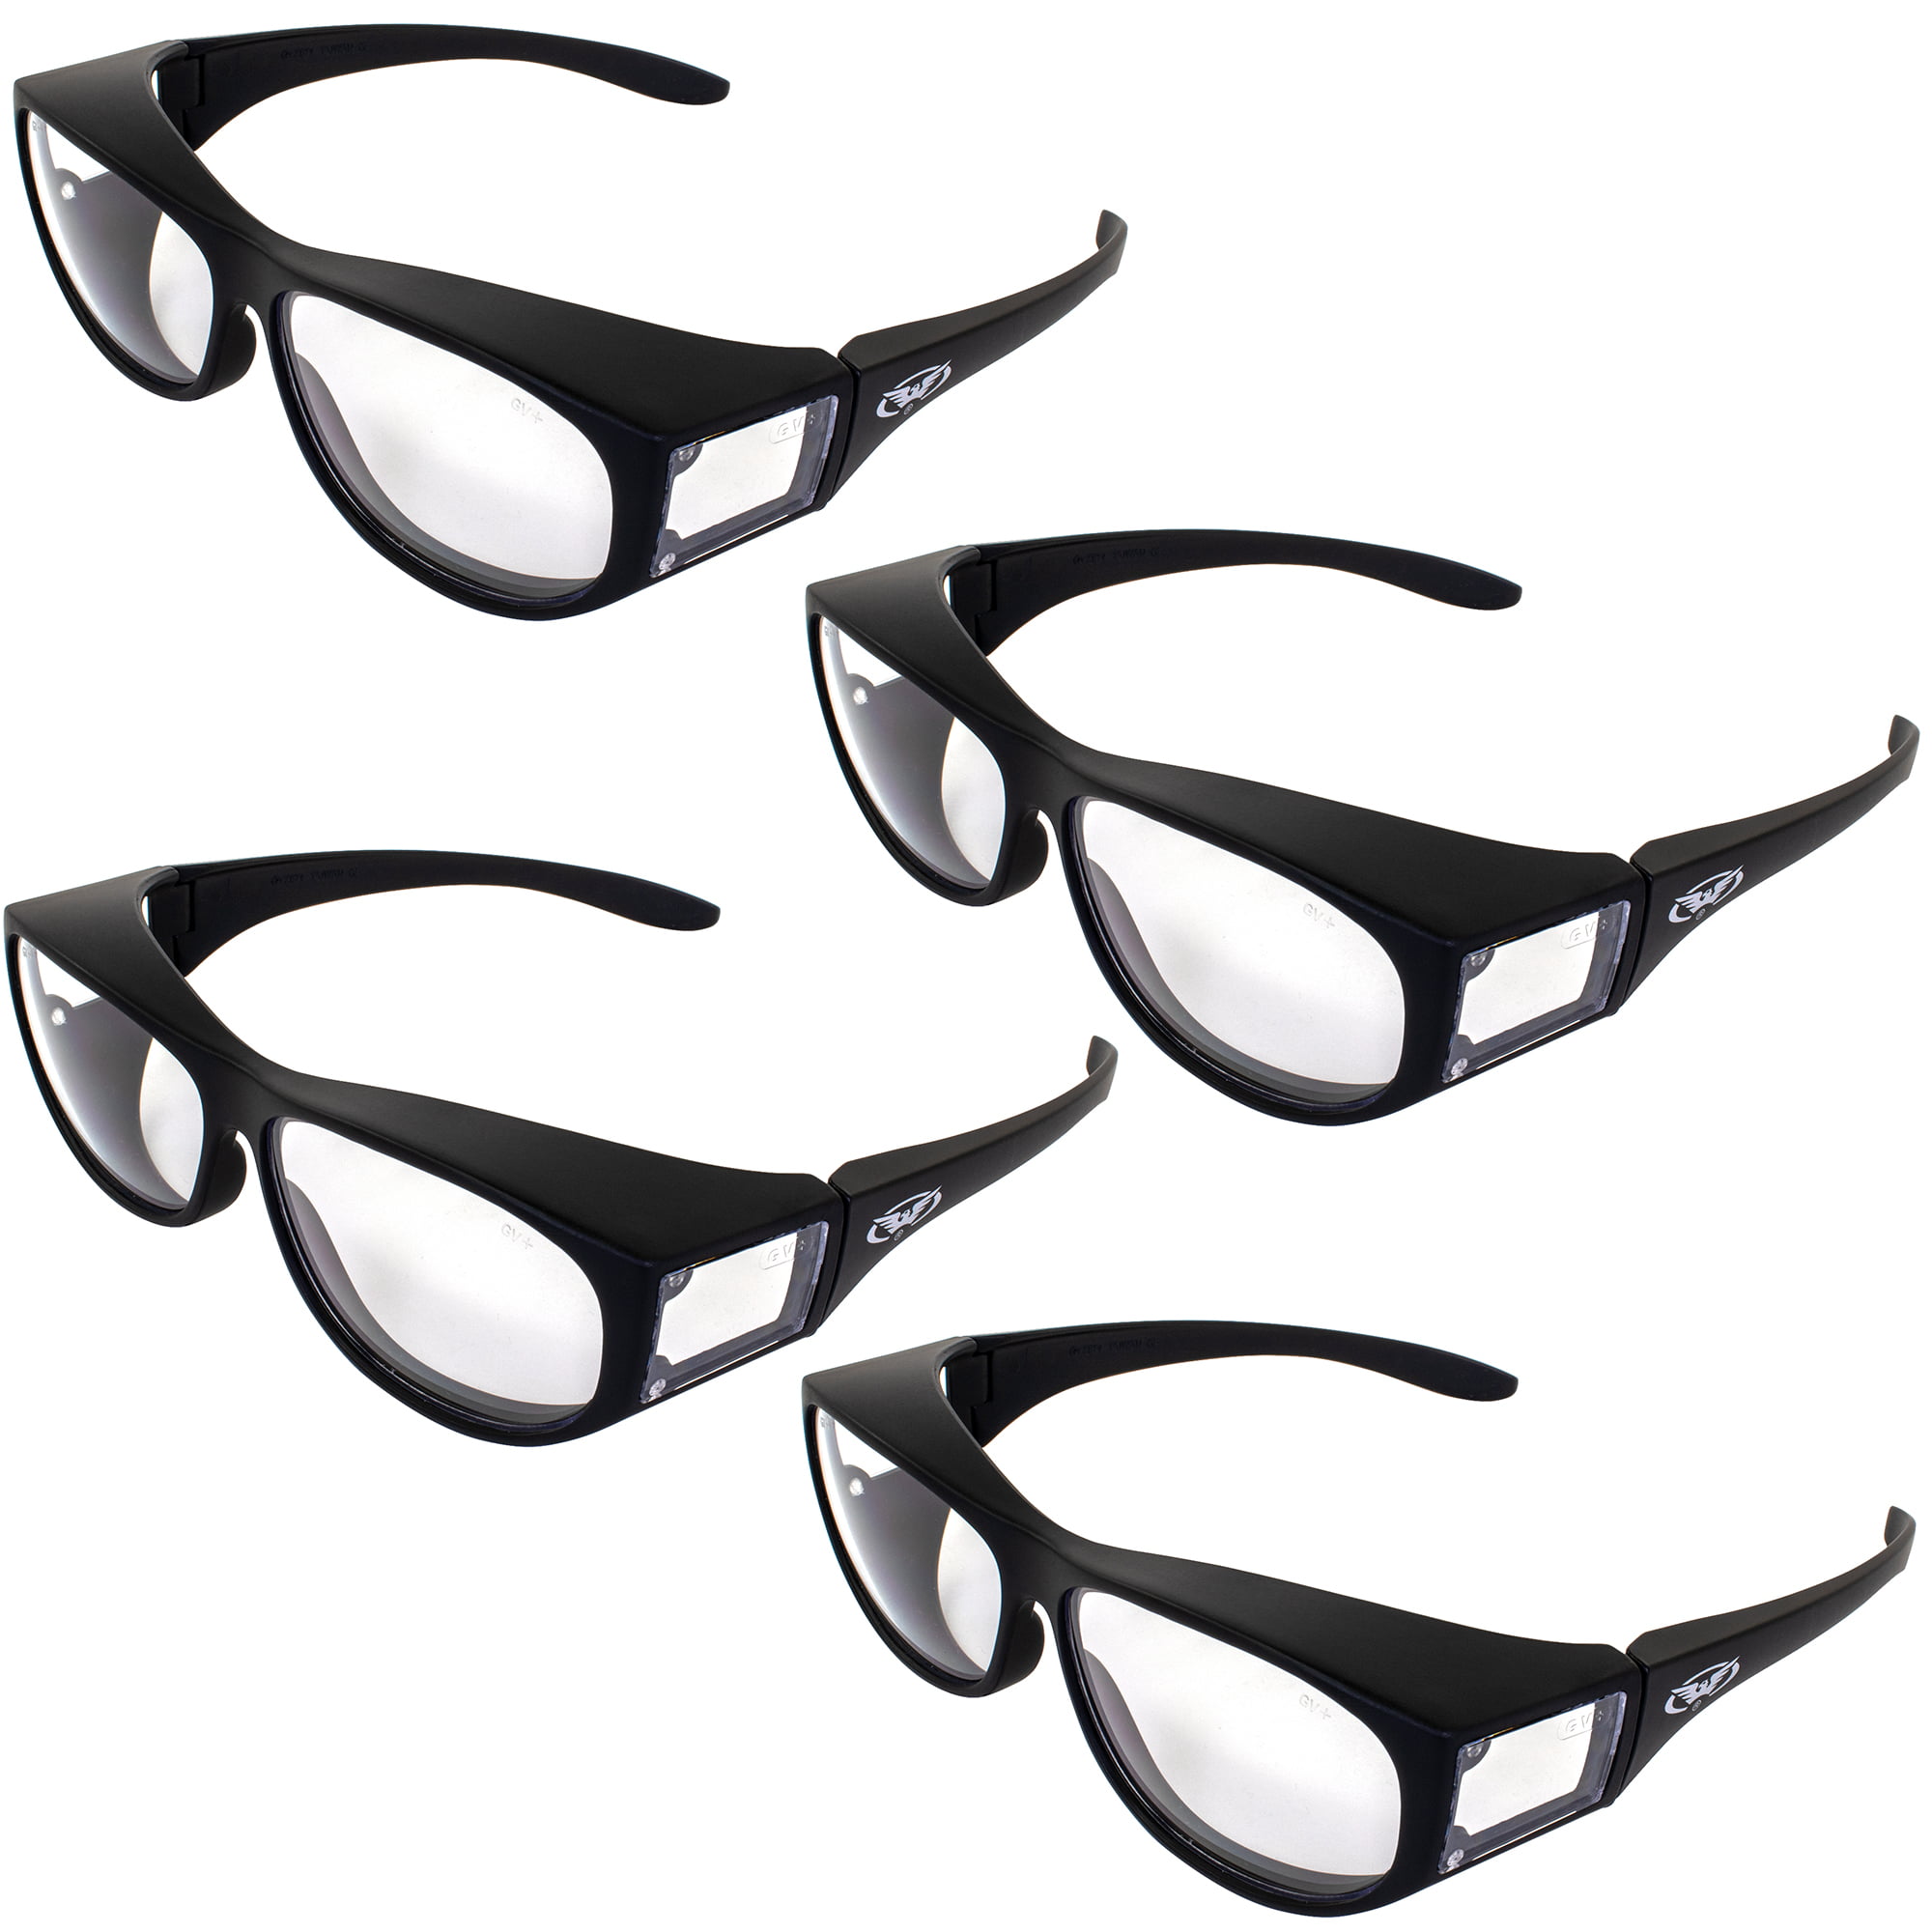 Gateway Safety 46MC10 Starlite Clear/Clear Lens 1.0 Safety Glasses 